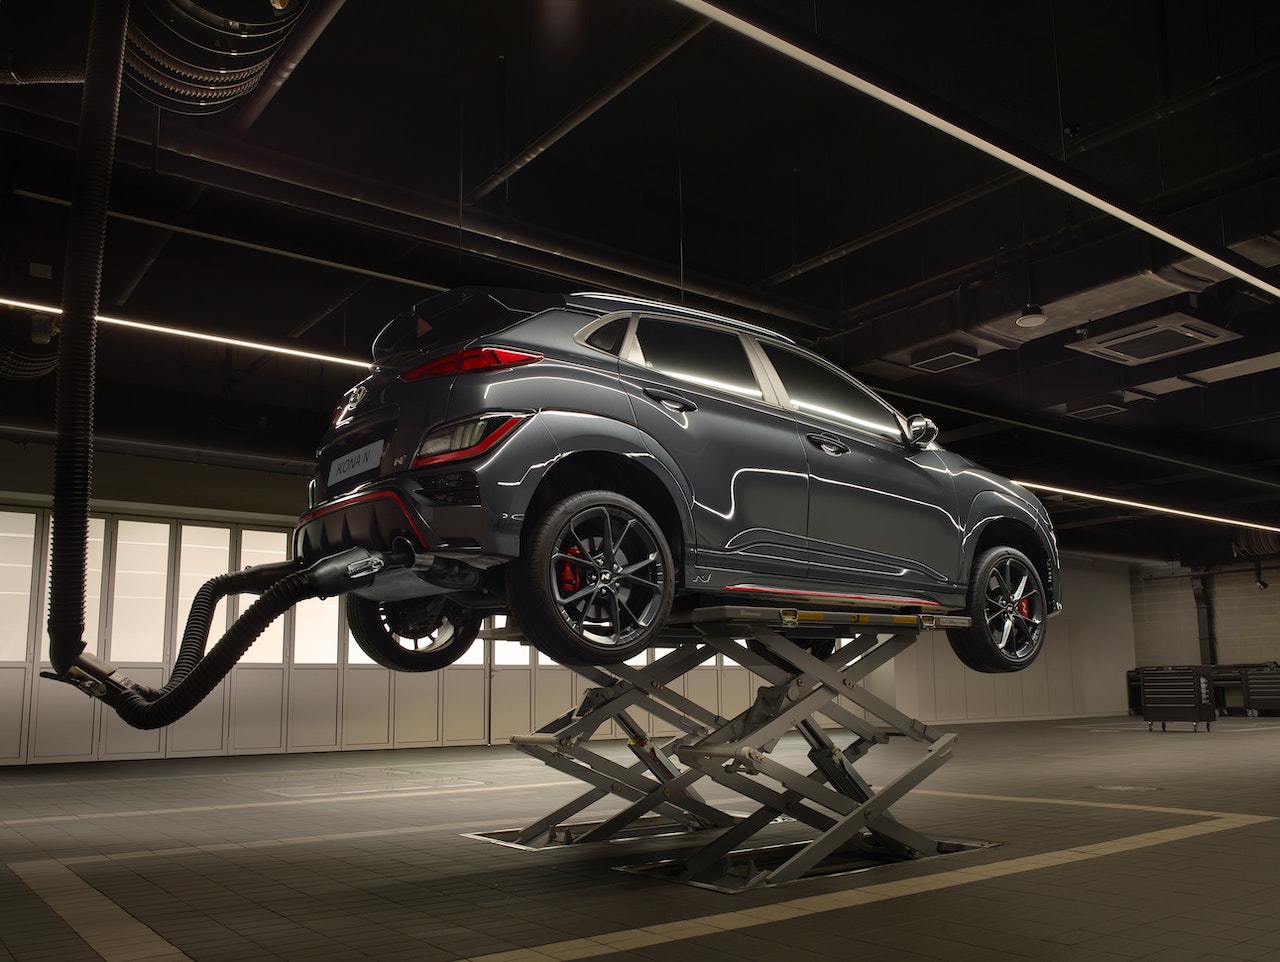 A Hyundai EV lifted up at the service shop to make sure the car is running properly